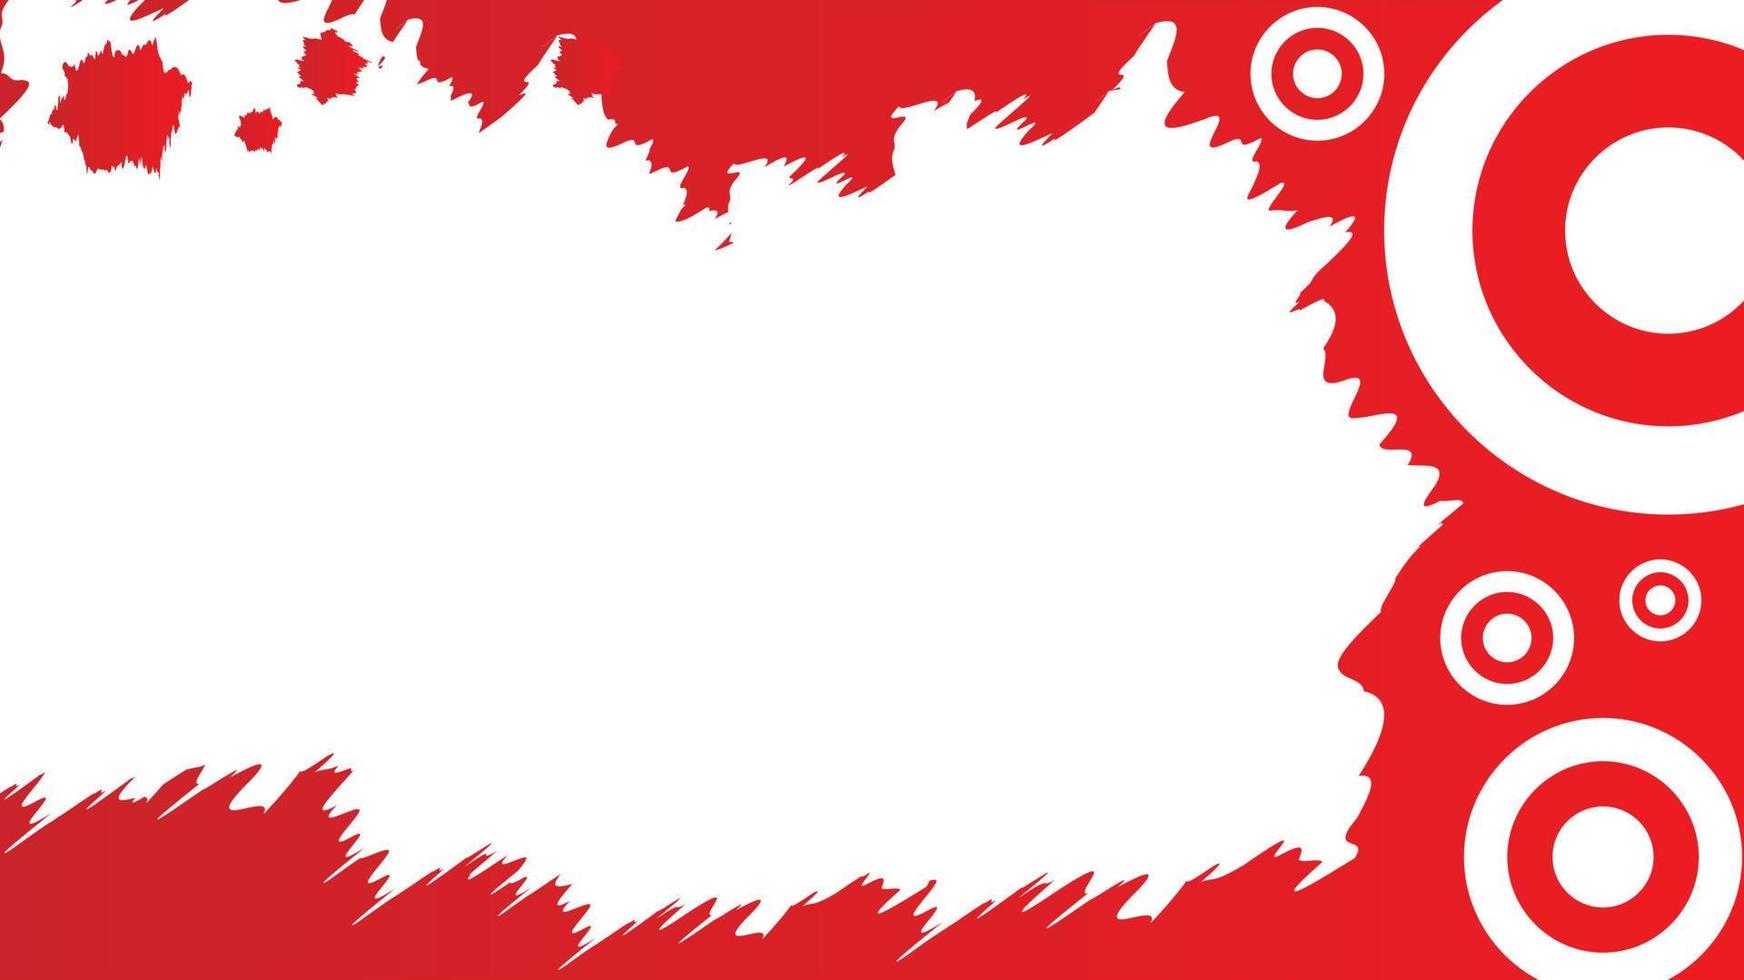 RED TARGET TEXT BACKGROUND VECTOR ILLUSTRATION